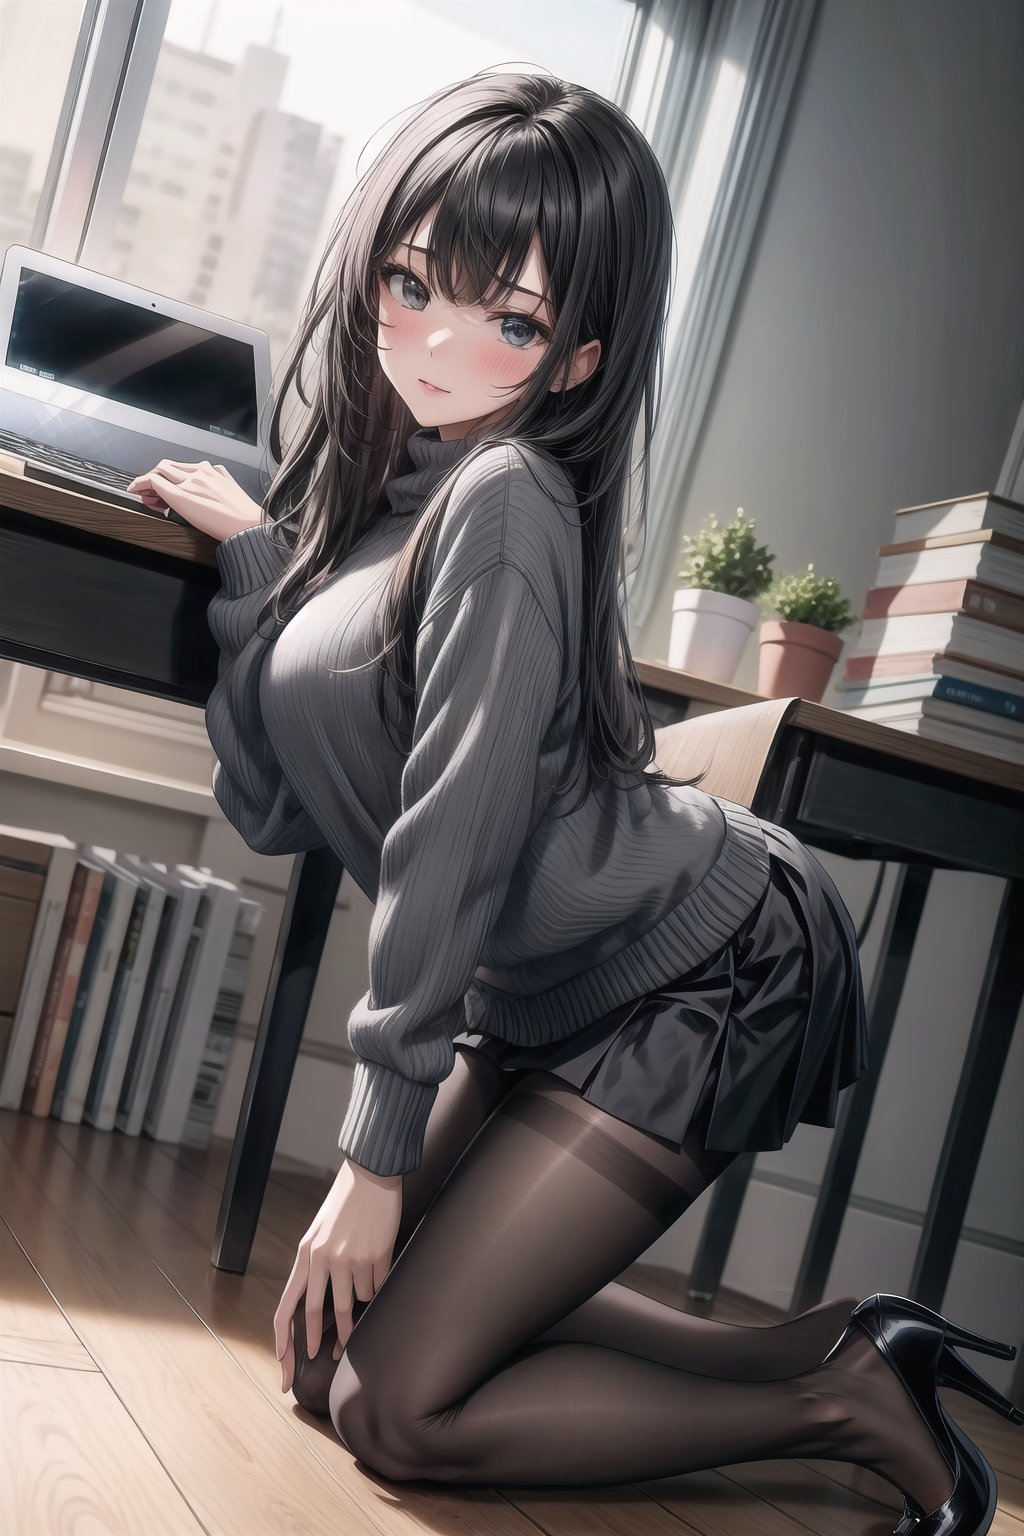 A girl with black, long hair. She is wearing a white shirt, black skirt, high heels, and pantyhose. She’s sitting on a chair, kneeling, with her legs spread, revealing her pantyhose. She has her hand on her thigh and is wearing a sweater. She’s in an office, with a laptop on a desk, looking at the viewer, blushing. Full body shot, low angle shot.